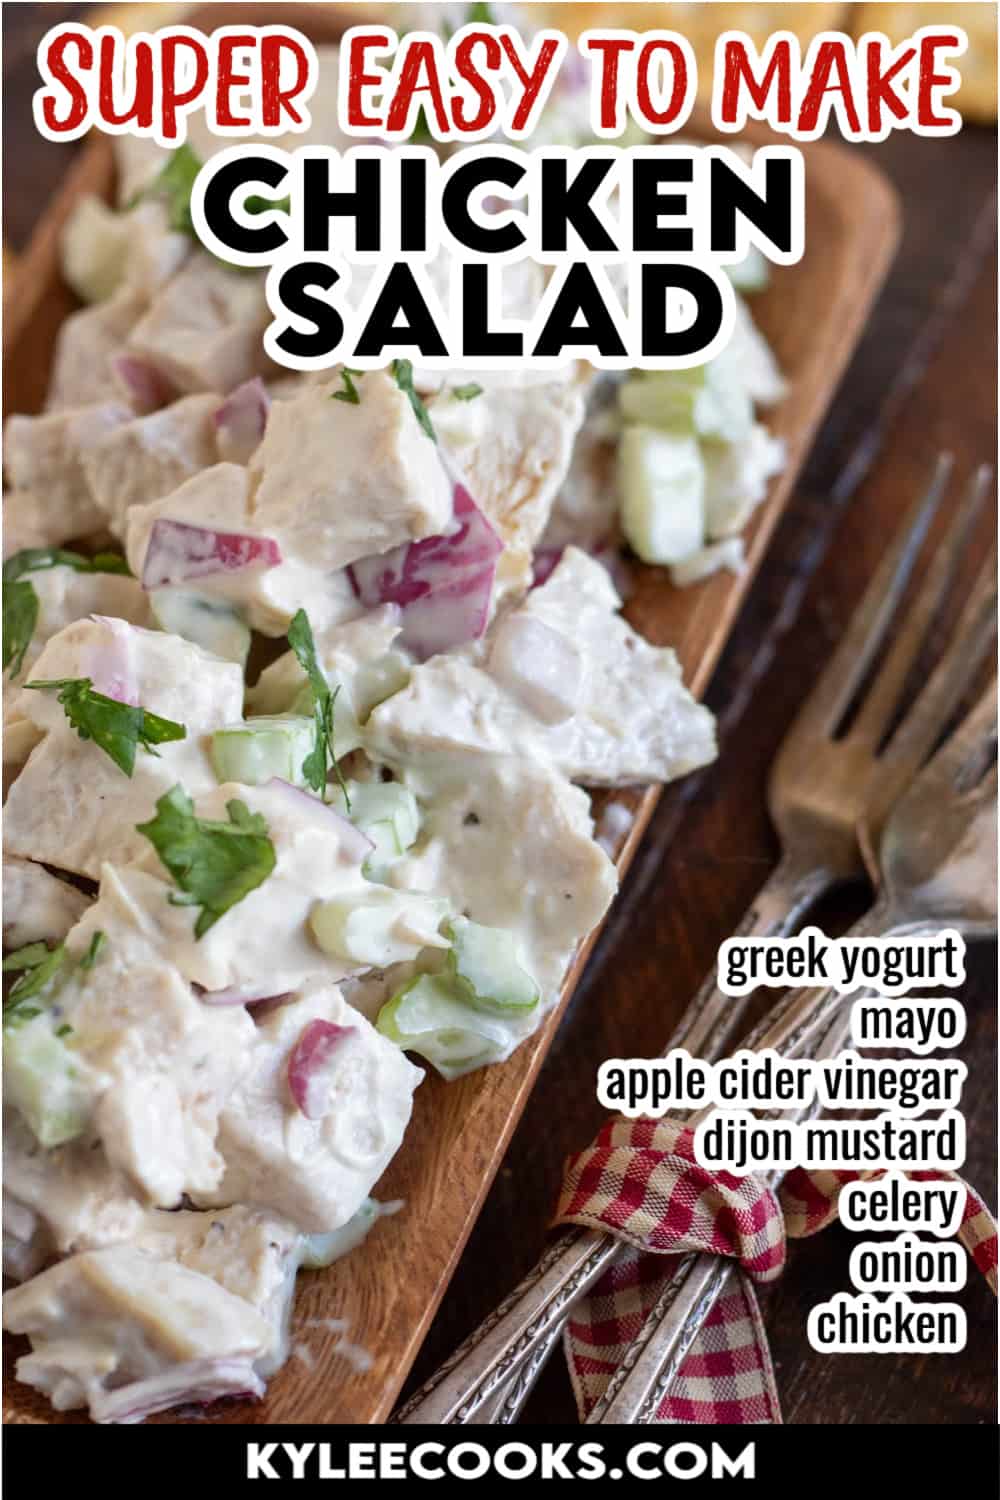 chicken salad on a wooden platter with recipe name and ingredients overlaid in text.